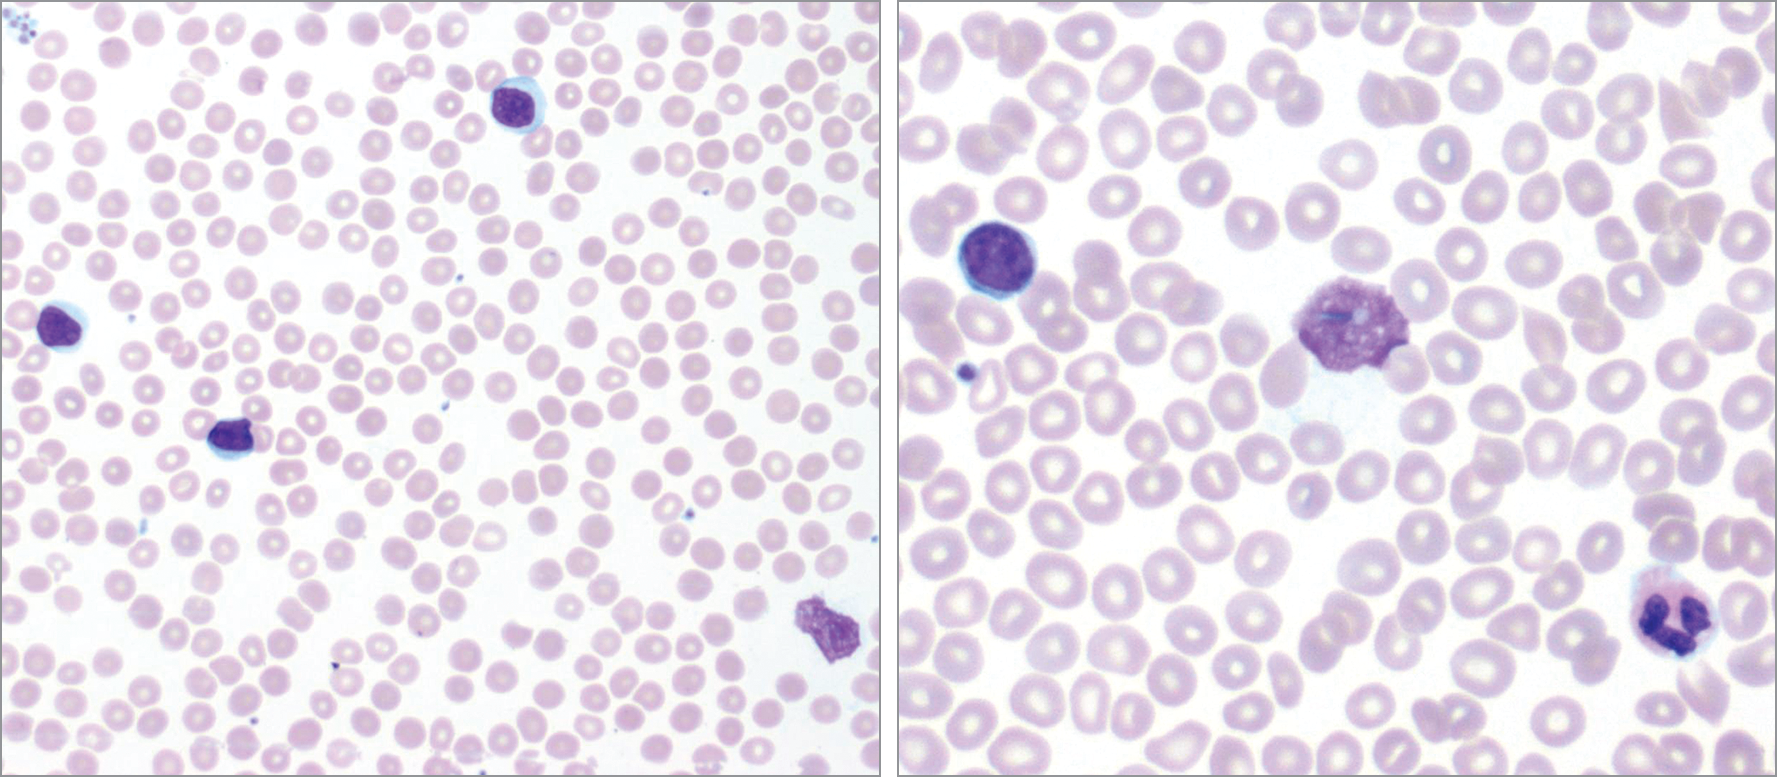 Weakness, Fatigue, and an Abnormal White Blood Cell Count